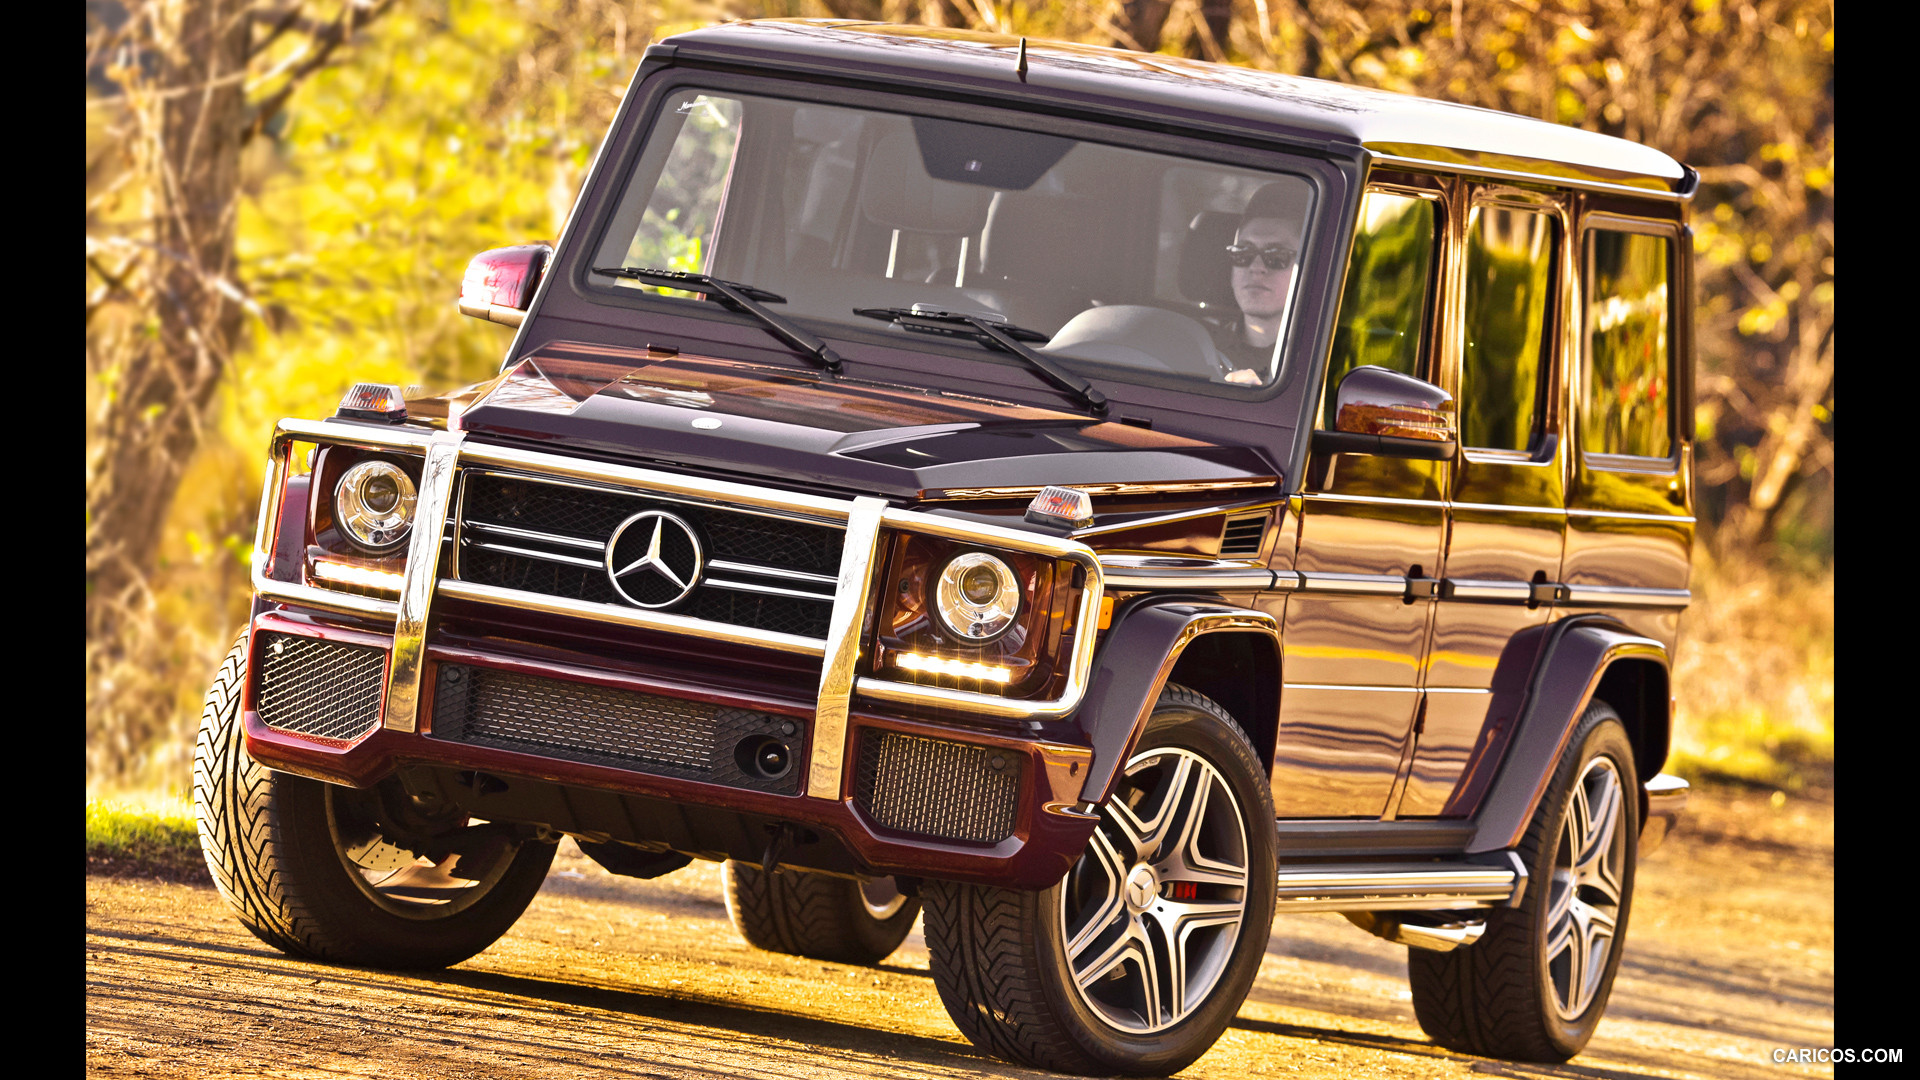 Mercedes-Benz G63 AMG US-Version (2013)  - Front, #40 of 83